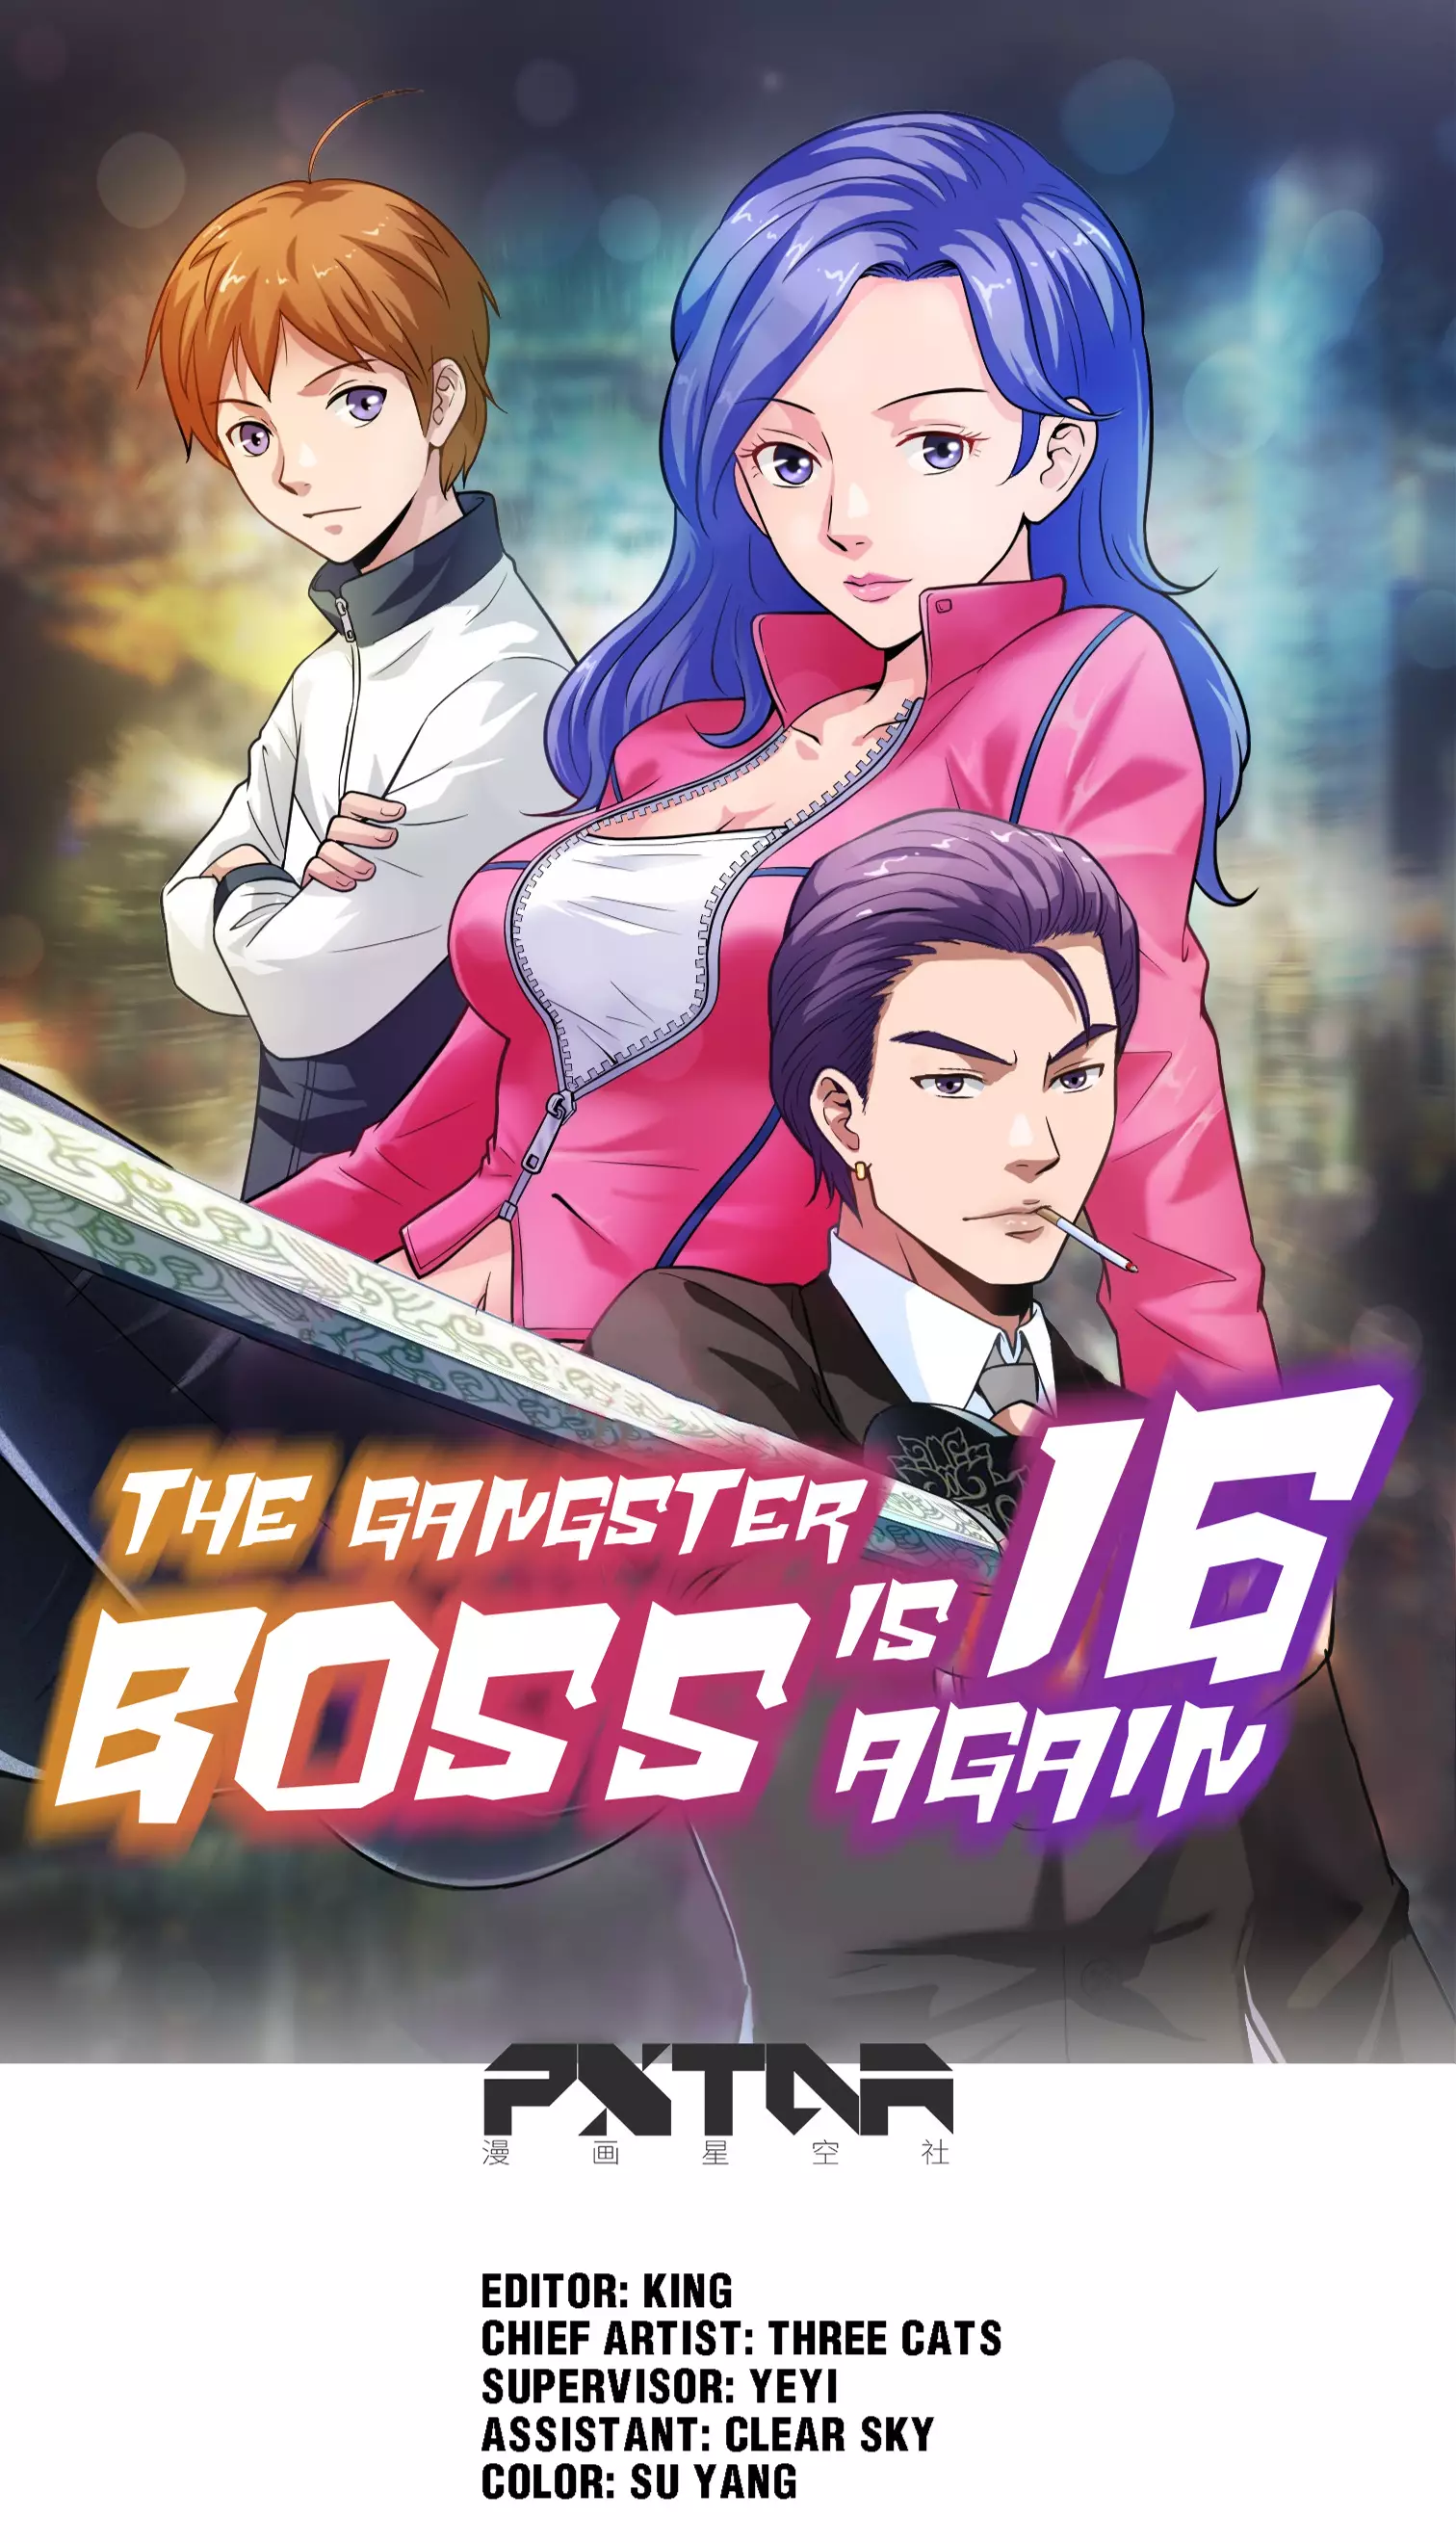 The Gangster Boss Is 16 Again - 58.1 page 1-e6dfe2e5